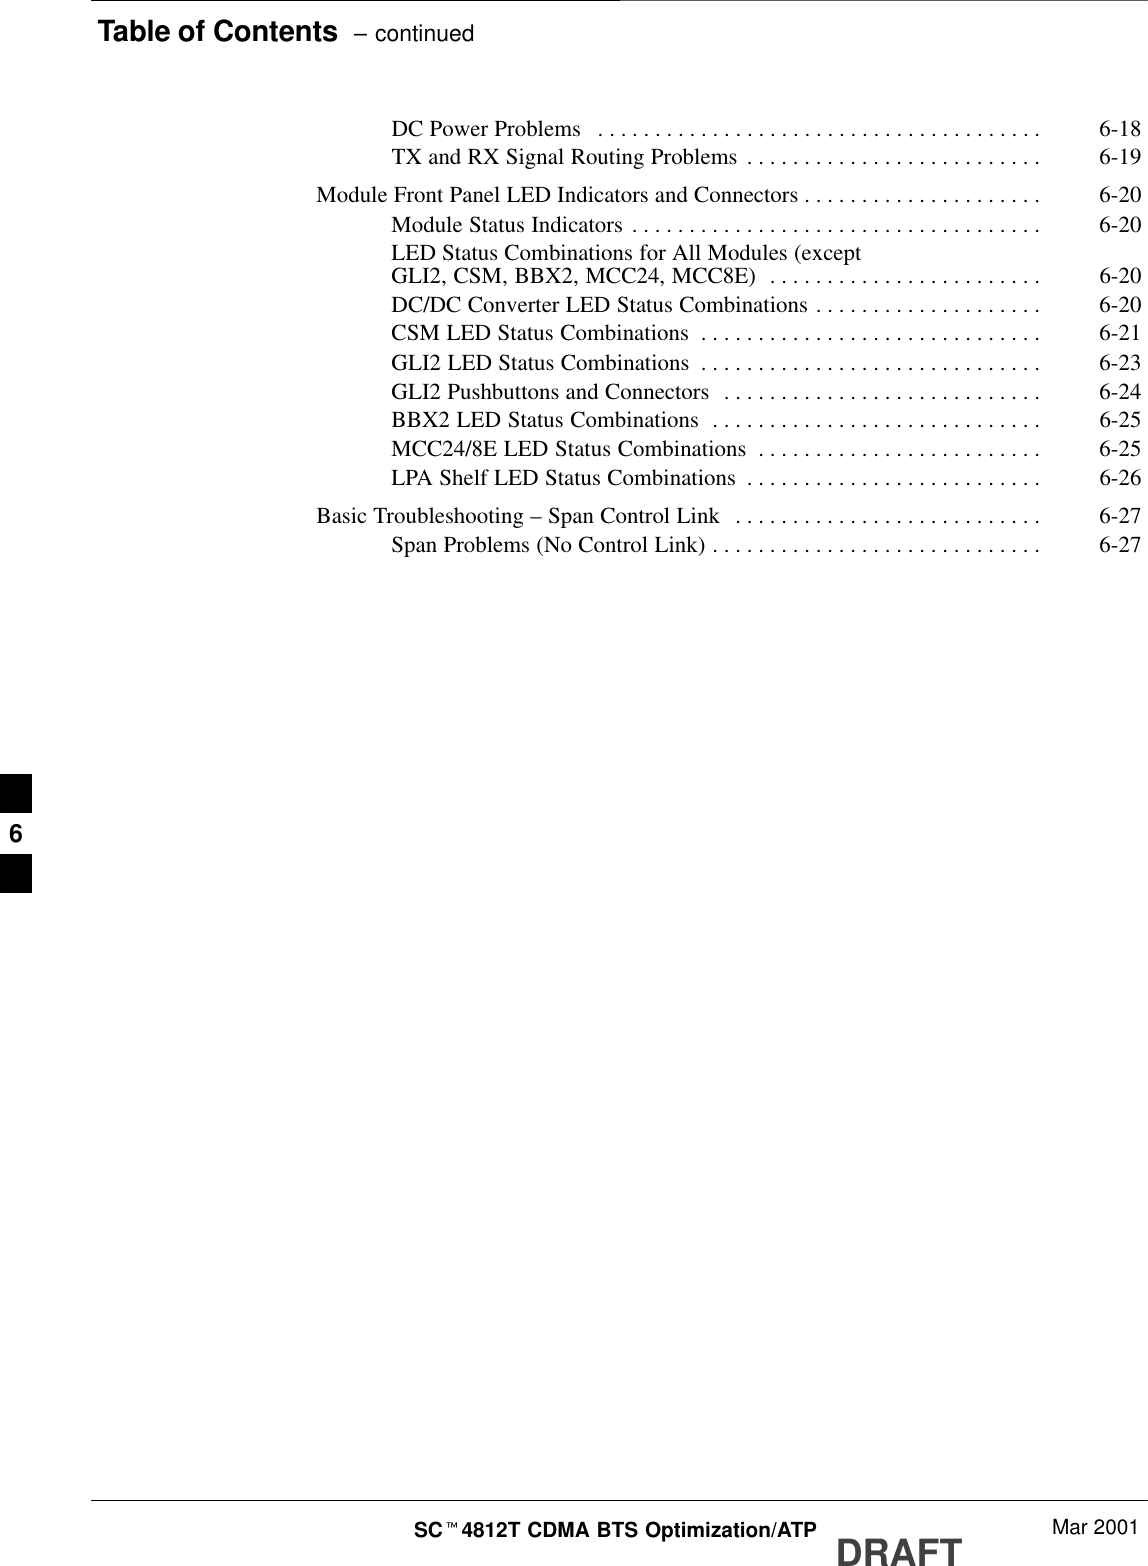 Table of Contents  – continuedDRAFTSCt4812T CDMA BTS Optimization/ATP Mar 2001DC Power Problems 6-18. . . . . . . . . . . . . . . . . . . . . . . . . . . . . . . . . . . . . . . TX and RX Signal Routing Problems 6-19. . . . . . . . . . . . . . . . . . . . . . . . . . Module Front Panel LED Indicators and Connectors 6-20. . . . . . . . . . . . . . . . . . . . . Module Status Indicators 6-20. . . . . . . . . . . . . . . . . . . . . . . . . . . . . . . . . . . . LED Status Combinations for All Modules (exceptGLI2, CSM, BBX2, MCC24, MCC8E) 6-20. . . . . . . . . . . . . . . . . . . . . . . . DC/DC Converter LED Status Combinations 6-20. . . . . . . . . . . . . . . . . . . . CSM LED Status Combinations 6-21. . . . . . . . . . . . . . . . . . . . . . . . . . . . . . GLI2 LED Status Combinations 6-23. . . . . . . . . . . . . . . . . . . . . . . . . . . . . . GLI2 Pushbuttons and Connectors 6-24. . . . . . . . . . . . . . . . . . . . . . . . . . . . BBX2 LED Status Combinations 6-25. . . . . . . . . . . . . . . . . . . . . . . . . . . . . MCC24/8E LED Status Combinations 6-25. . . . . . . . . . . . . . . . . . . . . . . . . LPA Shelf LED Status Combinations 6-26. . . . . . . . . . . . . . . . . . . . . . . . . . Basic Troubleshooting – Span Control Link 6-27. . . . . . . . . . . . . . . . . . . . . . . . . . . Span Problems (No Control Link) 6-27. . . . . . . . . . . . . . . . . . . . . . . . . . . . . 6